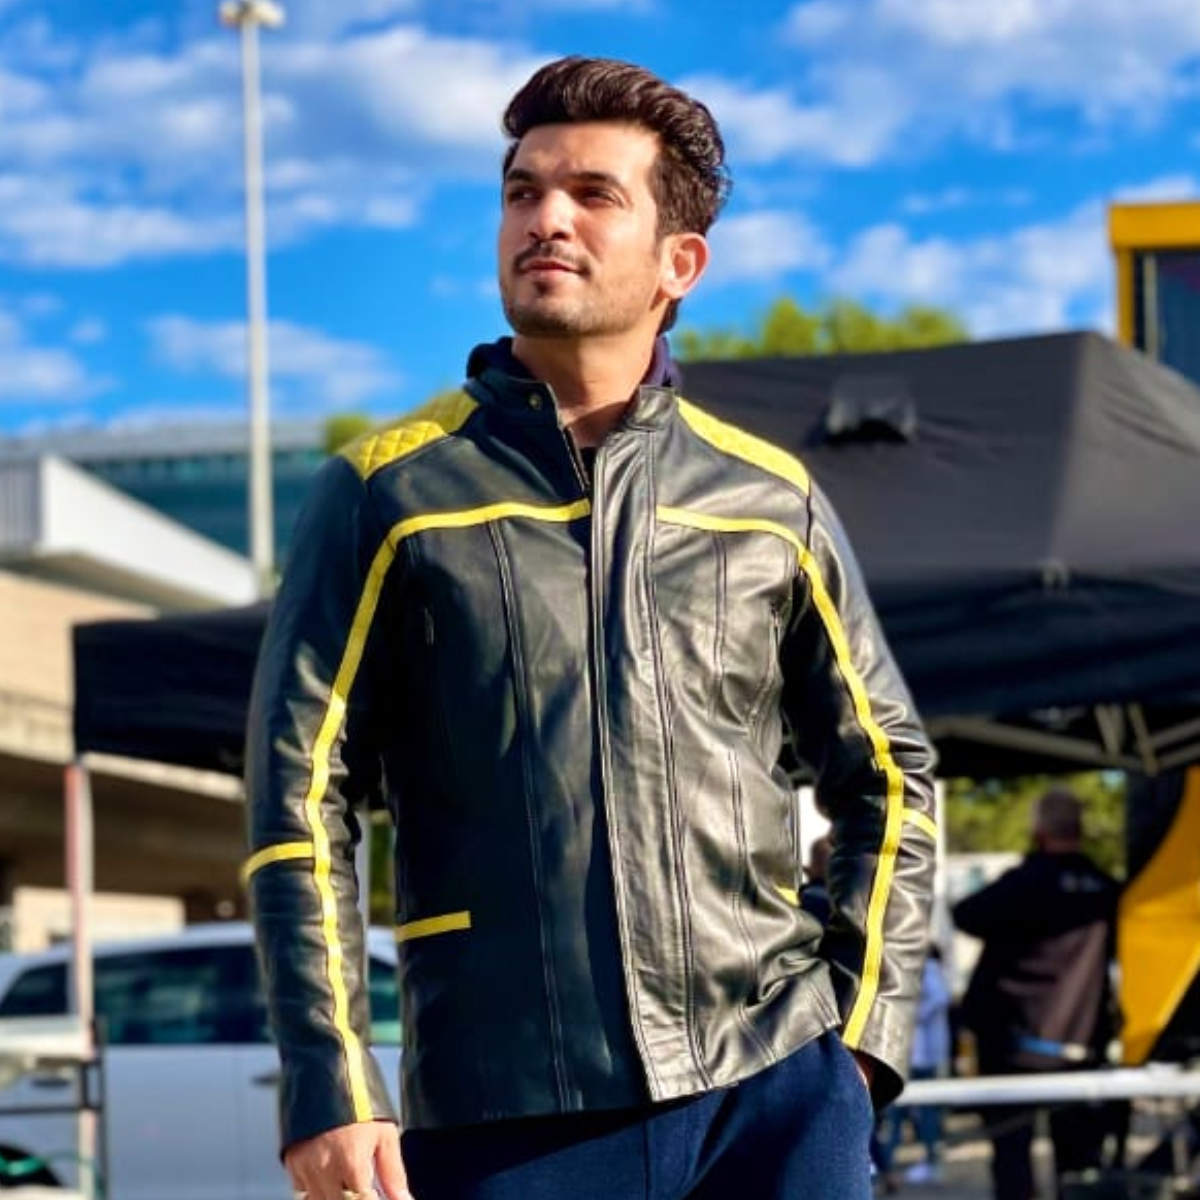 EXCLUSIVE: Here’s what scares Arjun Bijlani the most on Khatron Ke Khiladi 11 sets; Find out